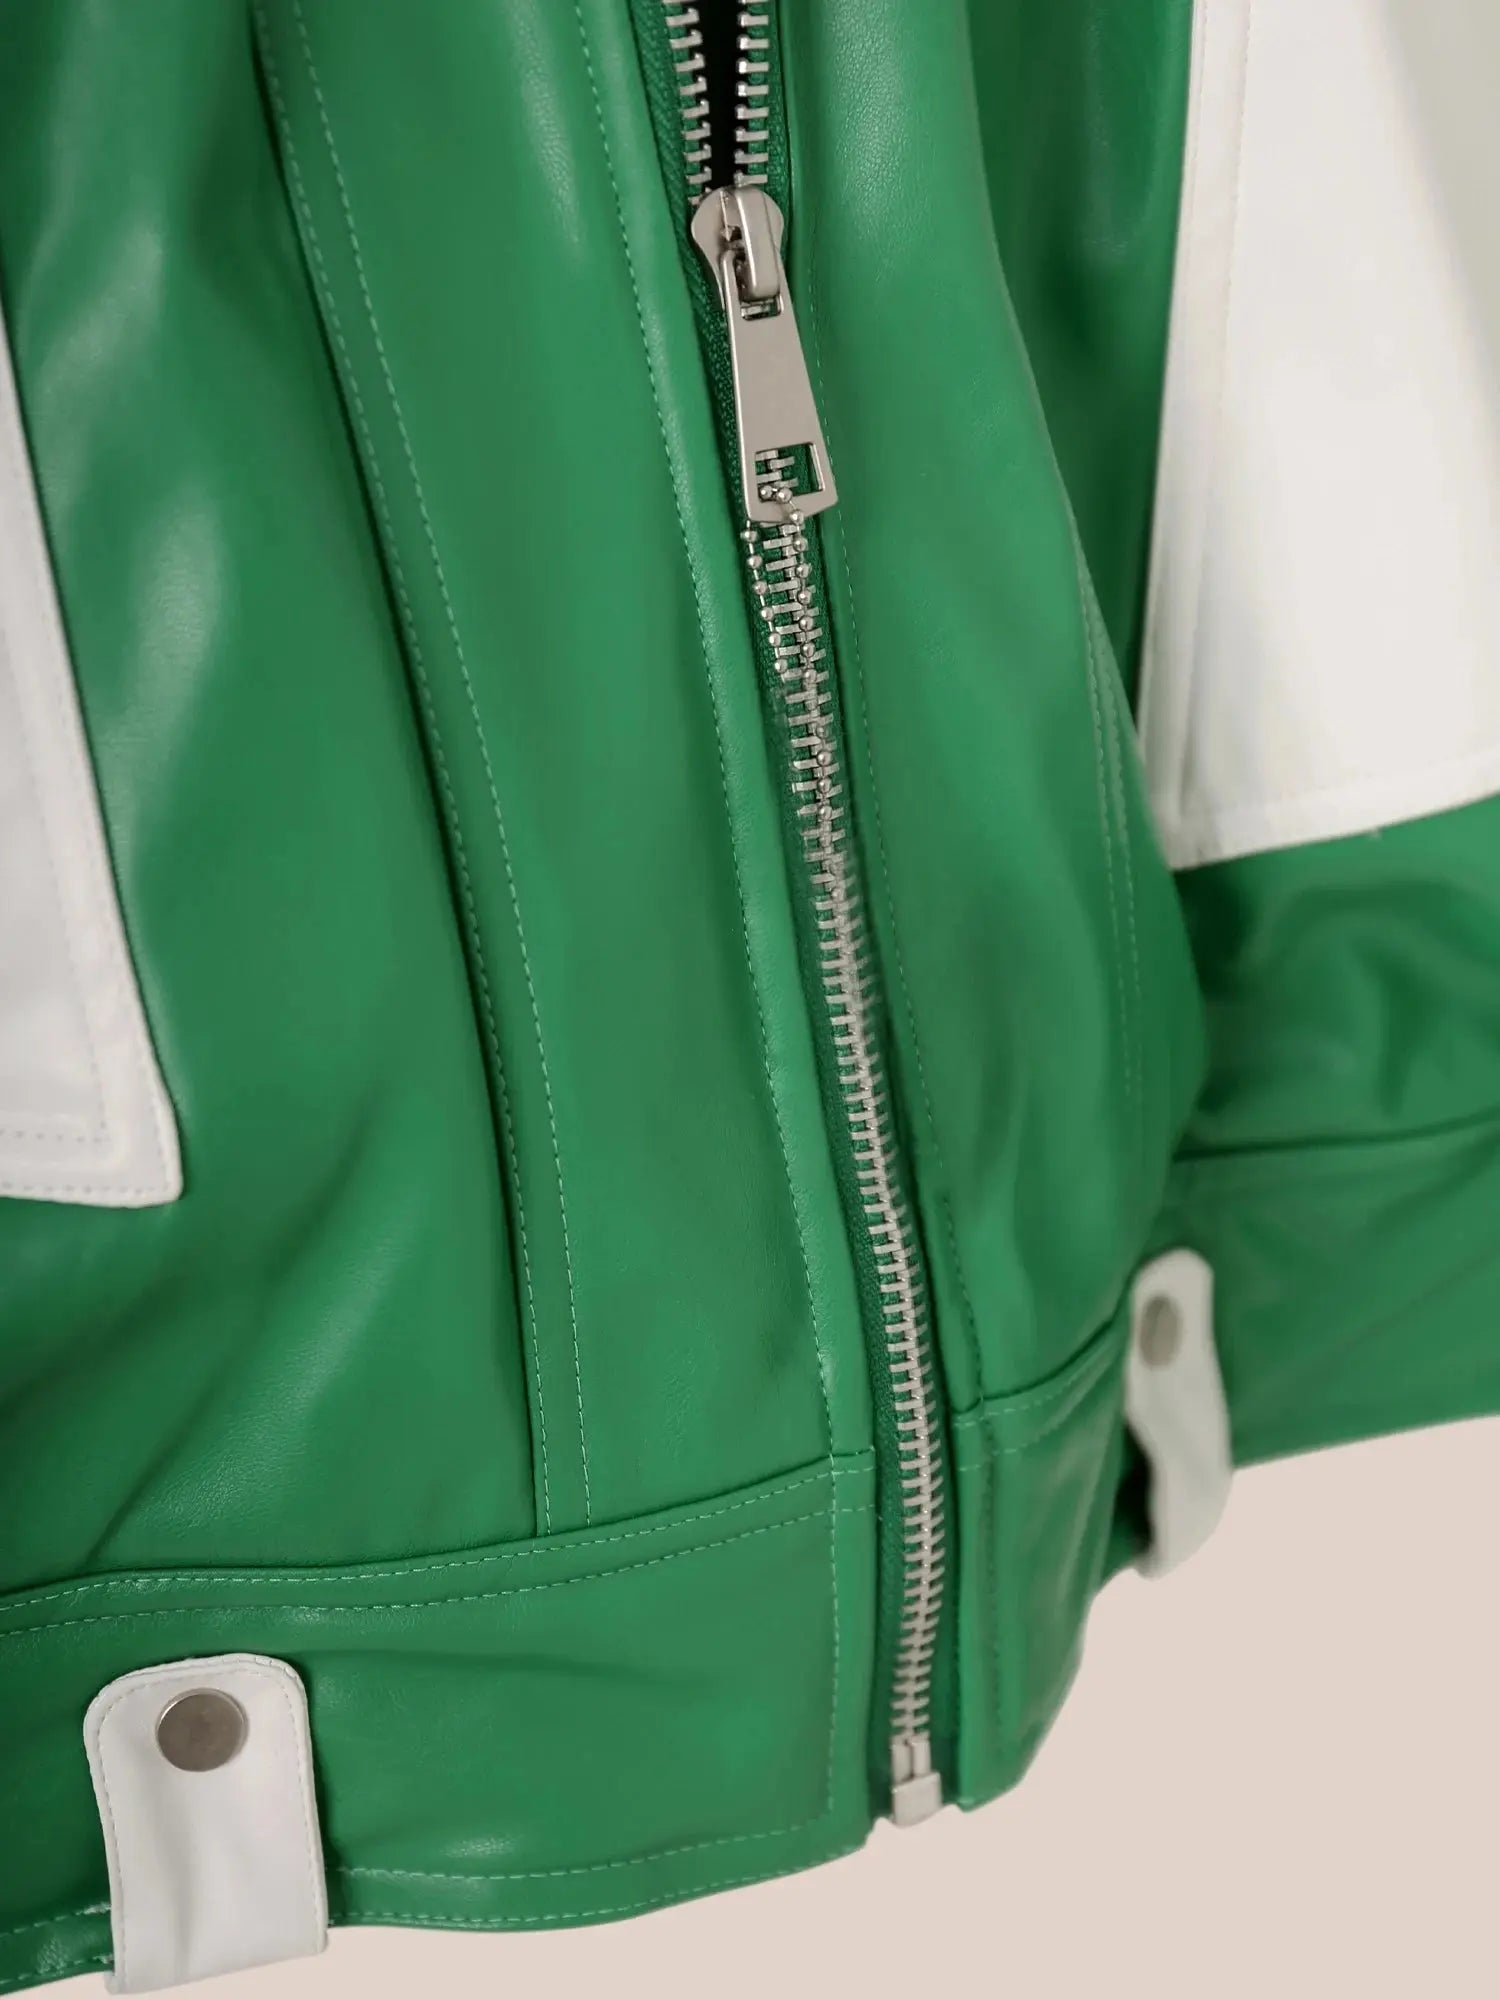 Mauroicardi Spring Autumn Oversized Green and White Patchwork Pu Leather Jacket Men with Many Zippers Luxury Designer Clothes Hominus Denim